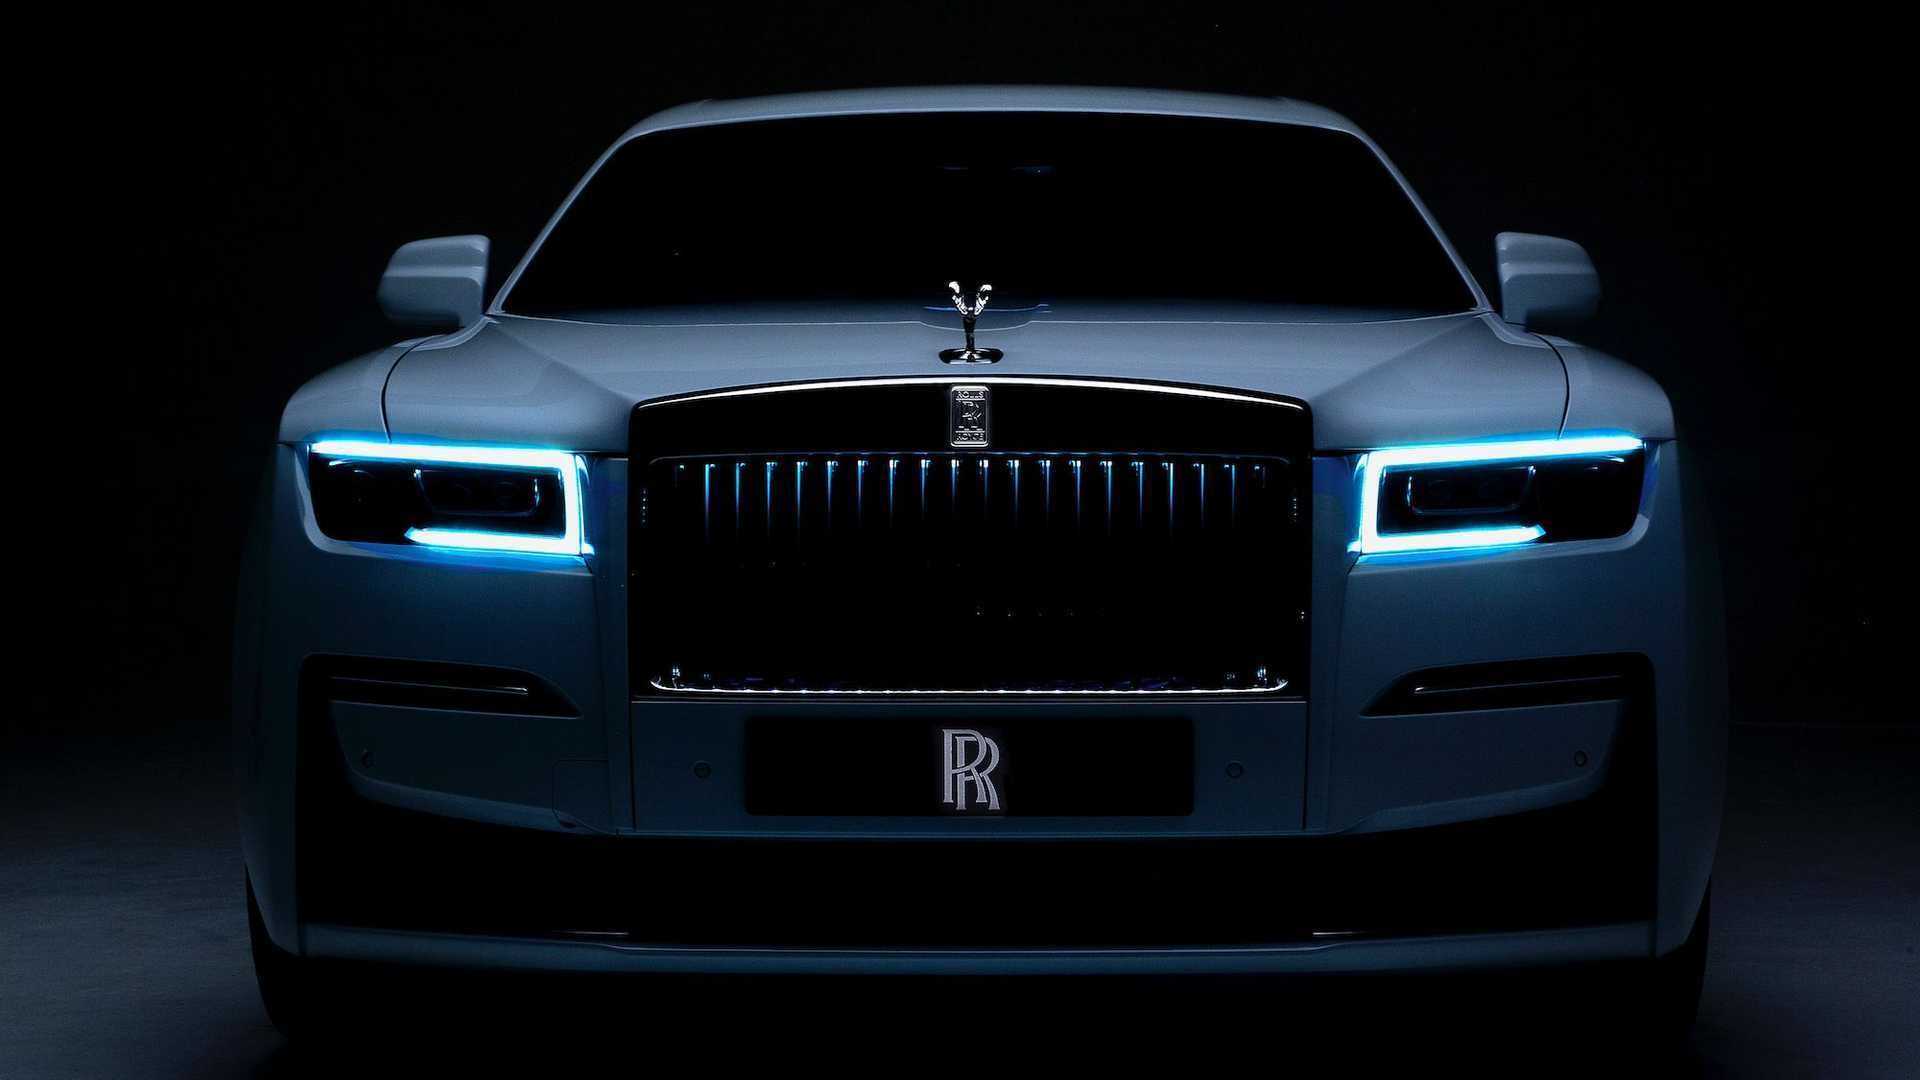 Rumor: Electric Rolls-Royce Coming With BMW i7 Motors And Huge Battery